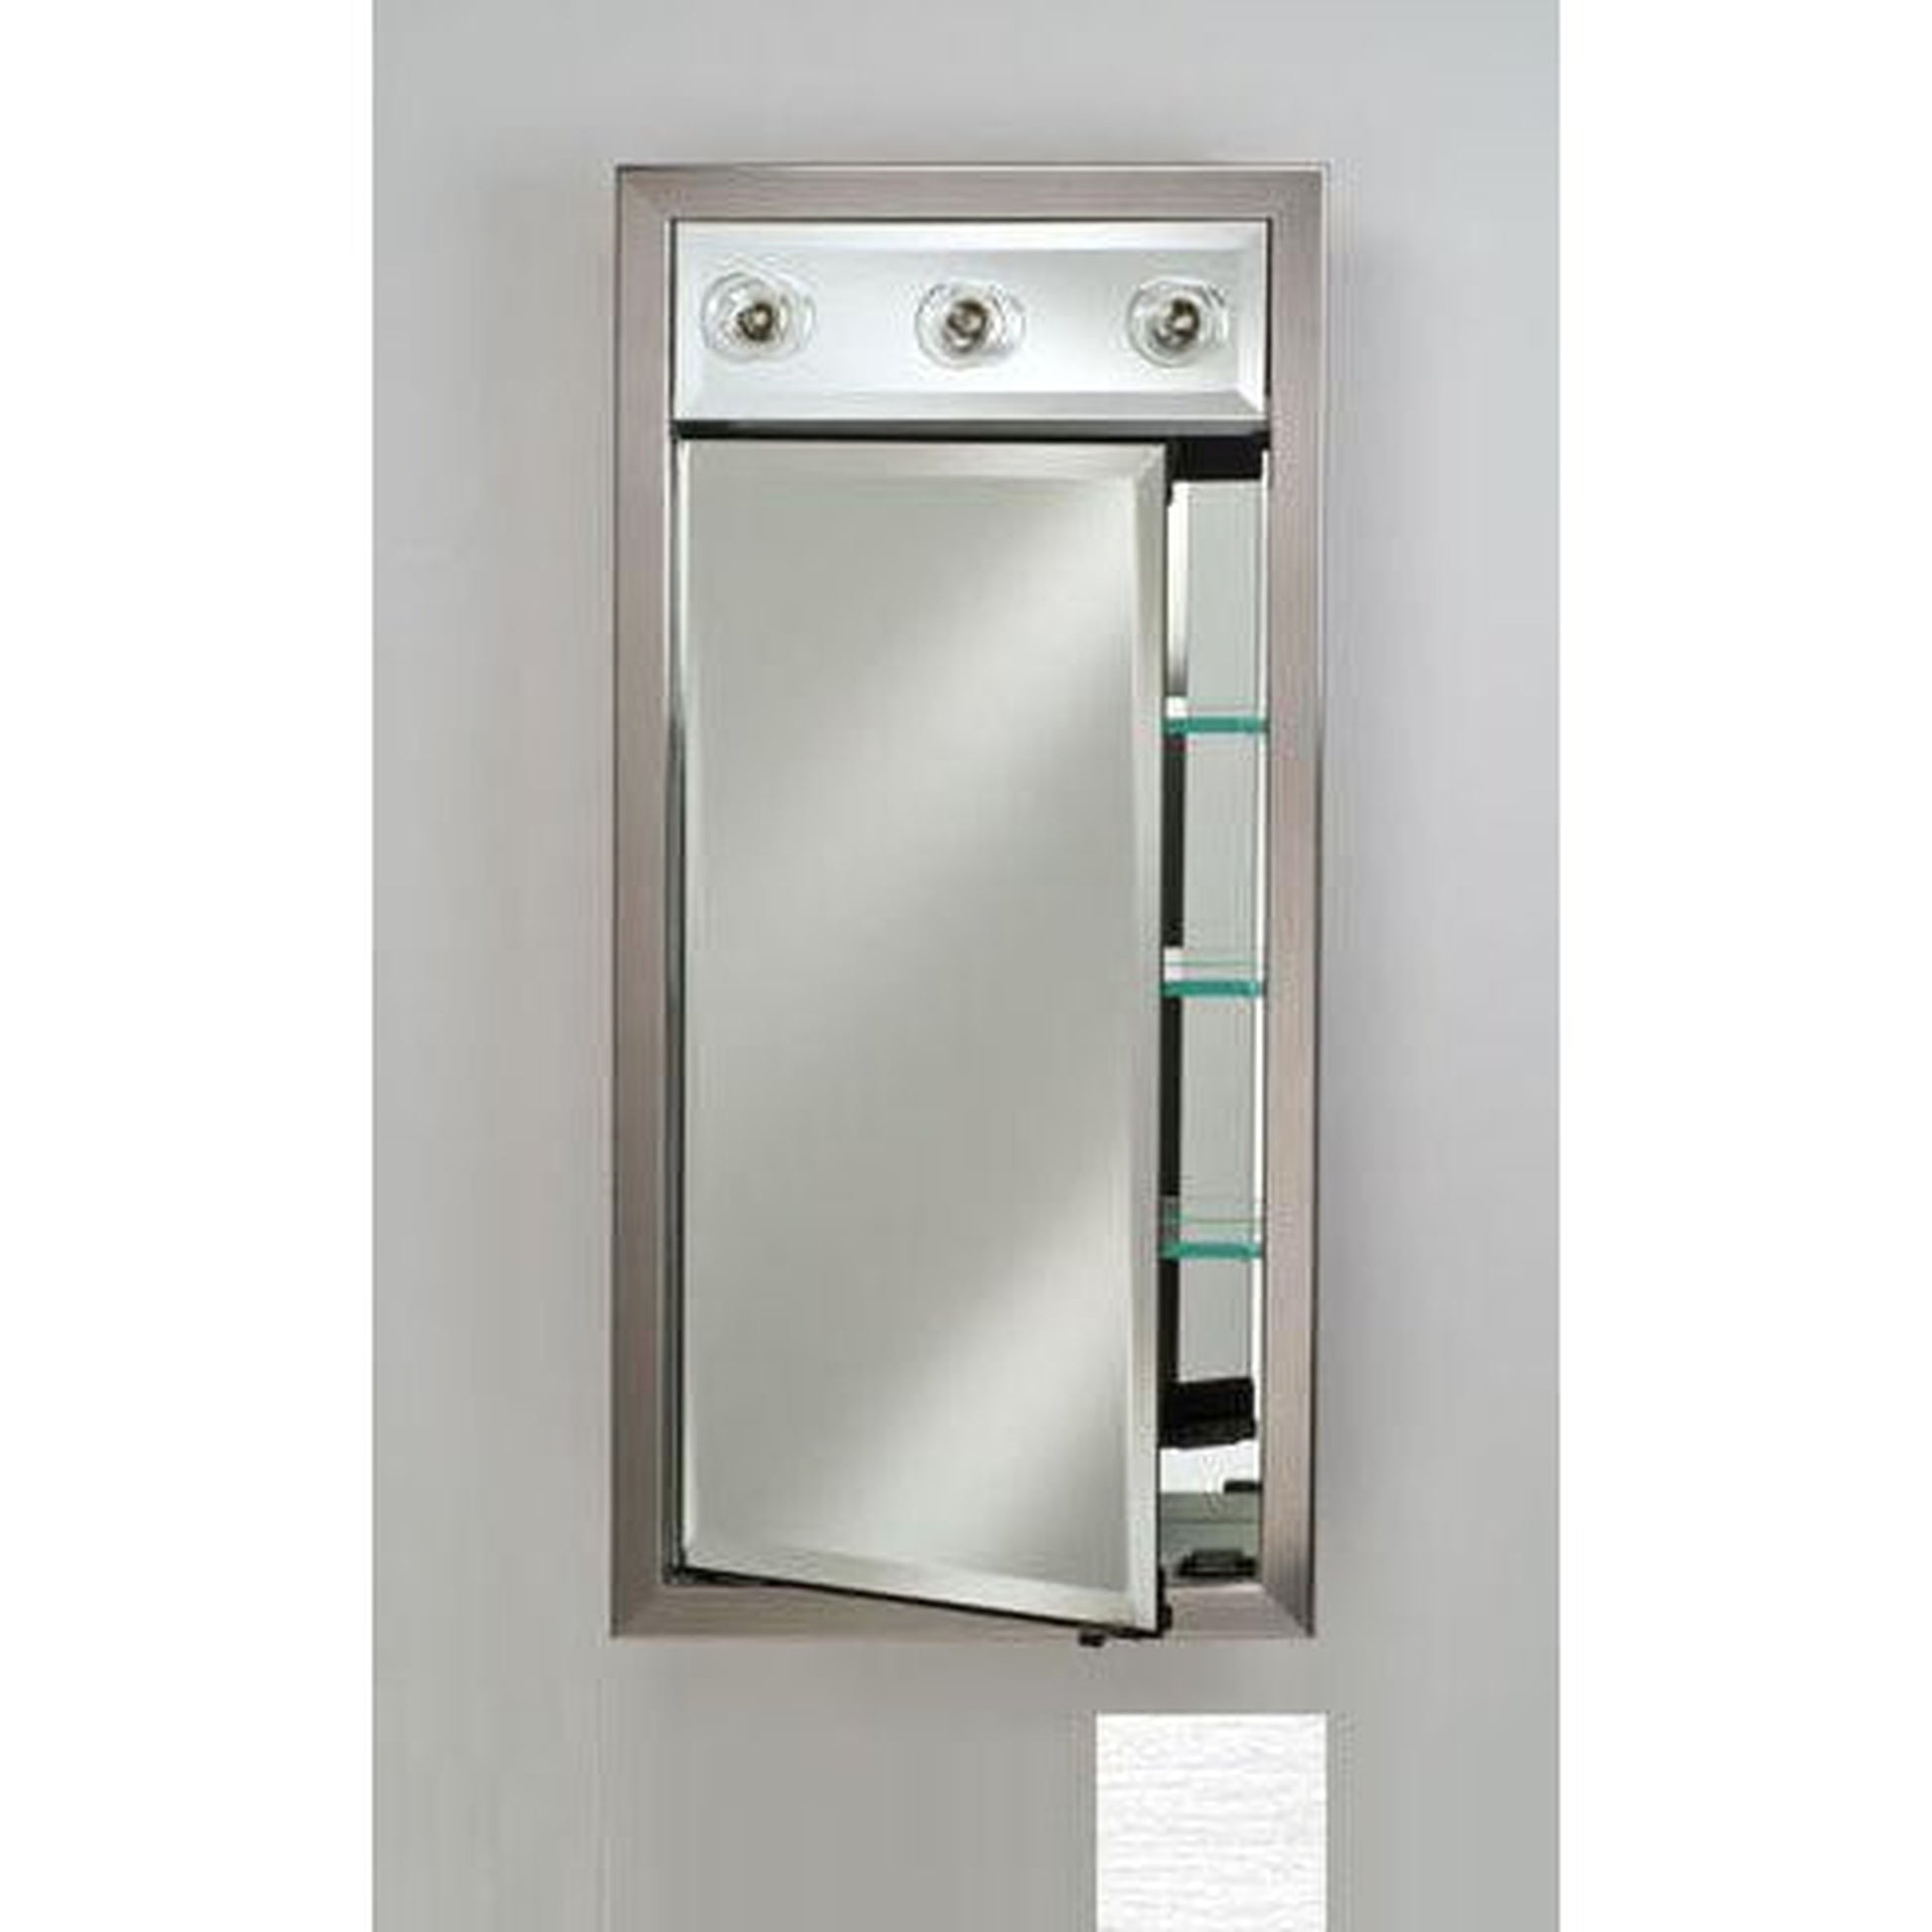 Afina Signature 17" x 30" Tribeca Satin Silver Recessed Right Hinged Single Door Medicine Cabinet With Contemporary Lights